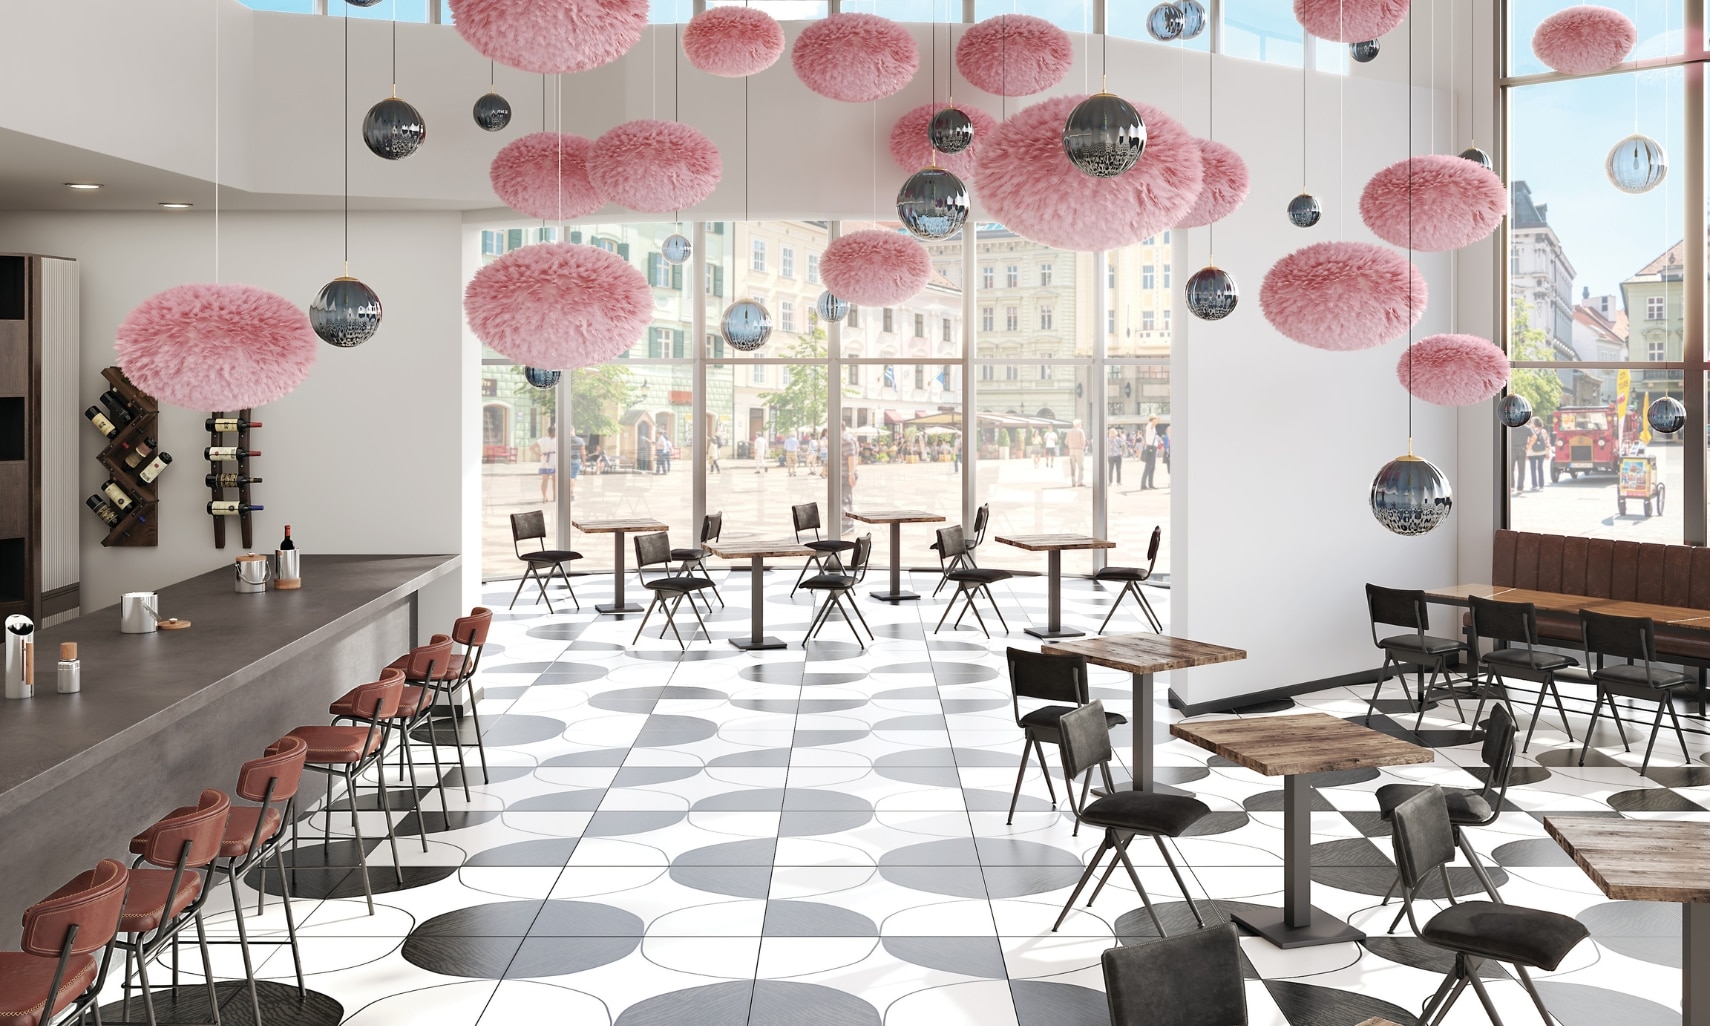 Restaurant with white floor tile with black circles & designs, pink & silver décor hanging from the ceiling, wood tables with black chairs, gray porcelain slab countertop.